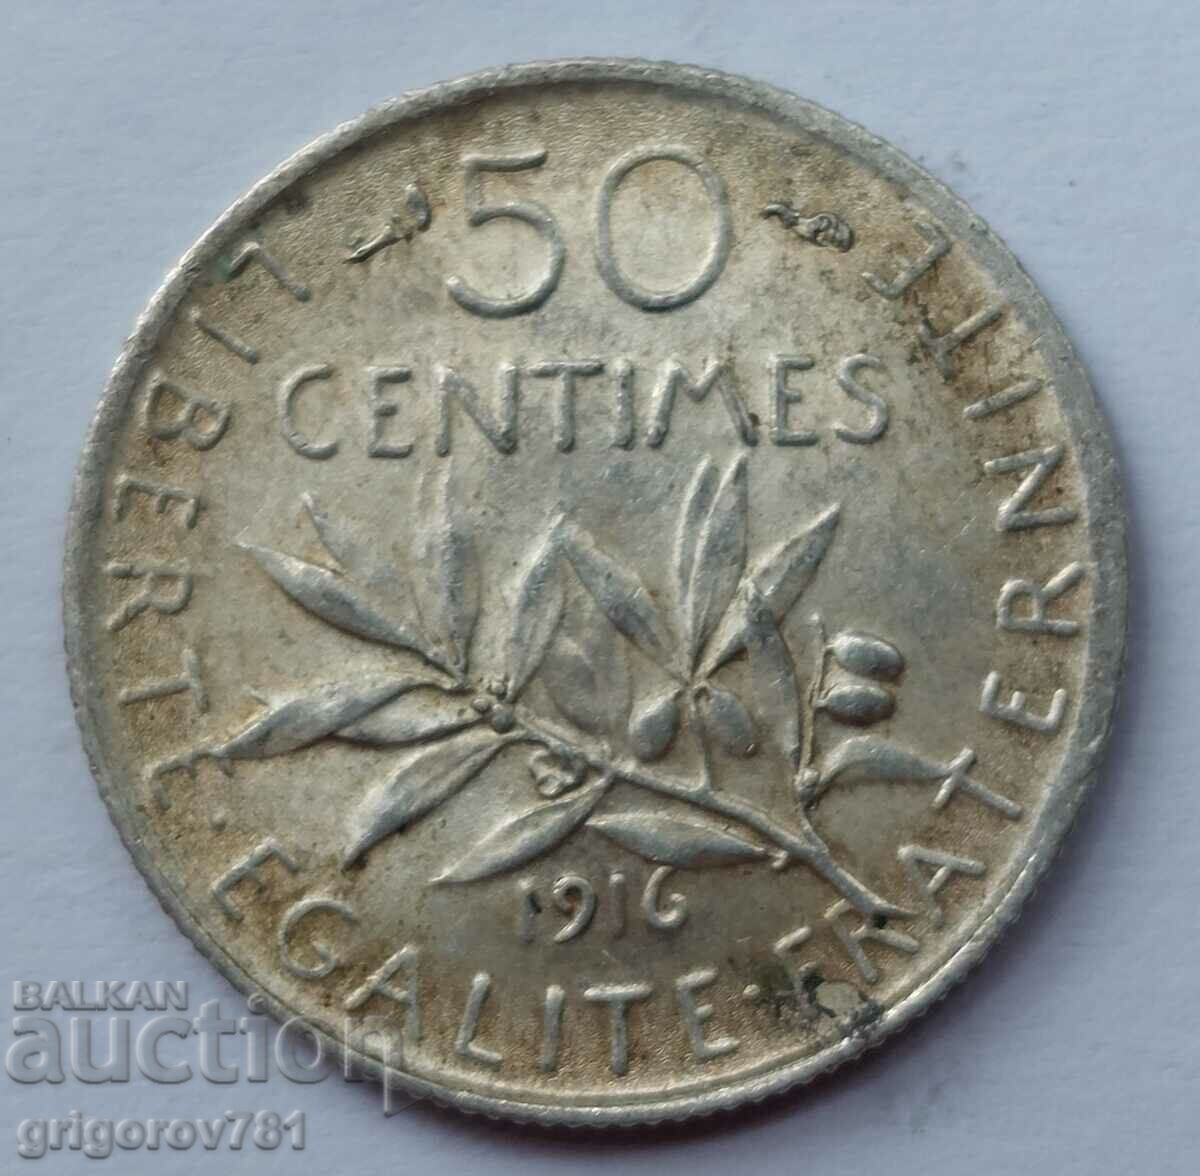 50 centimes silver France 1916 - silver coin №52